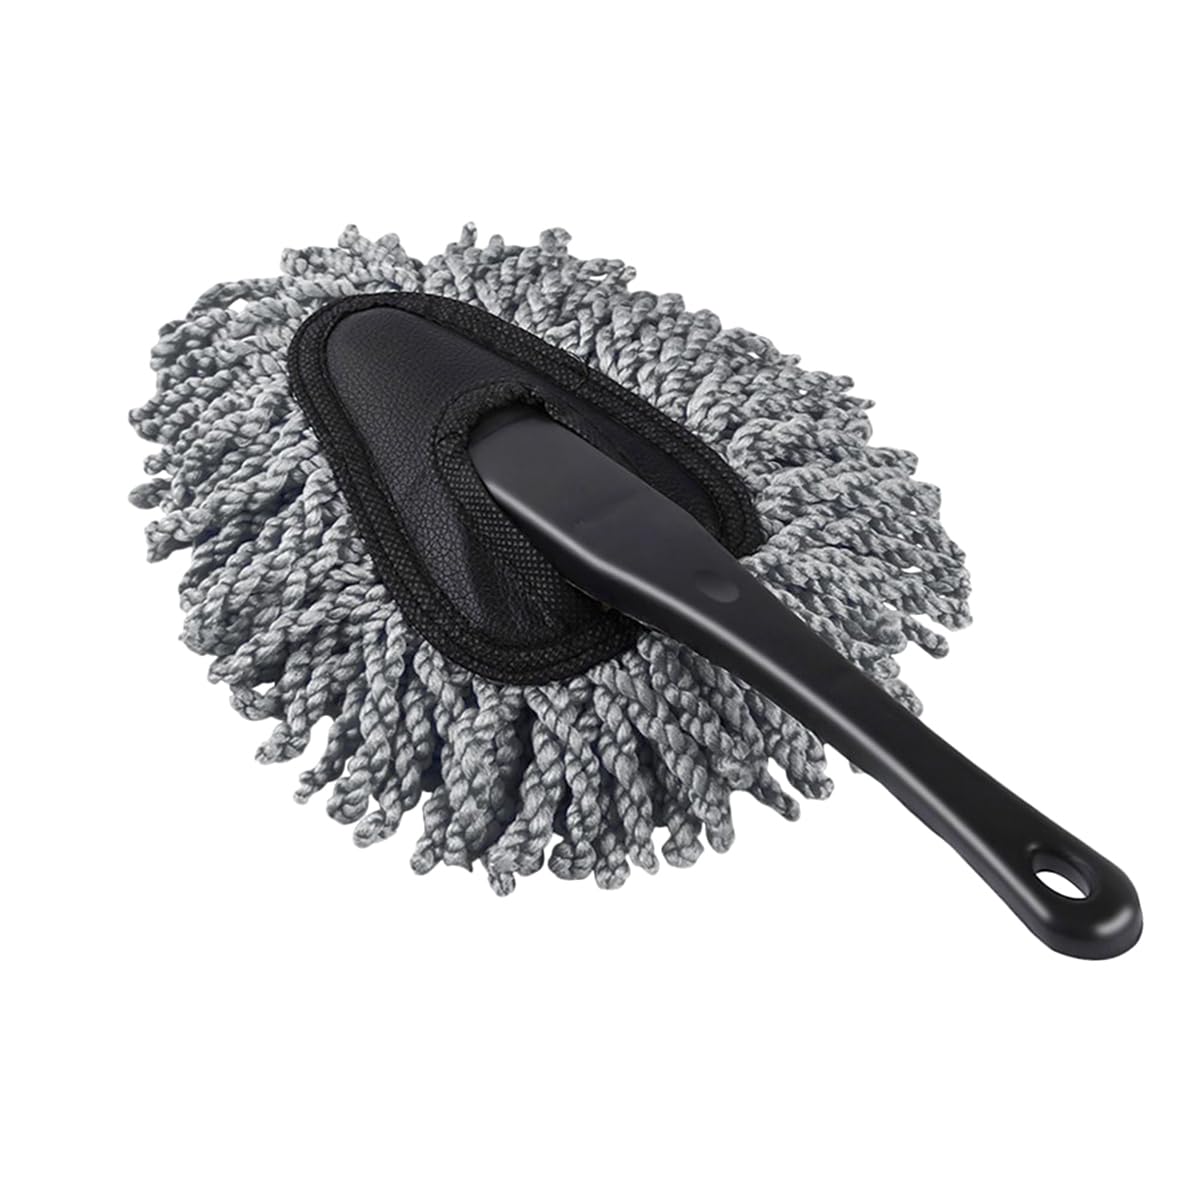 Wemaker Multi-Functional Car Dash Duster, Car Interior & Exterior Cleaning Dirt Dust Clean Brush Dusting Tool Mop Gray car Cleaning Prod